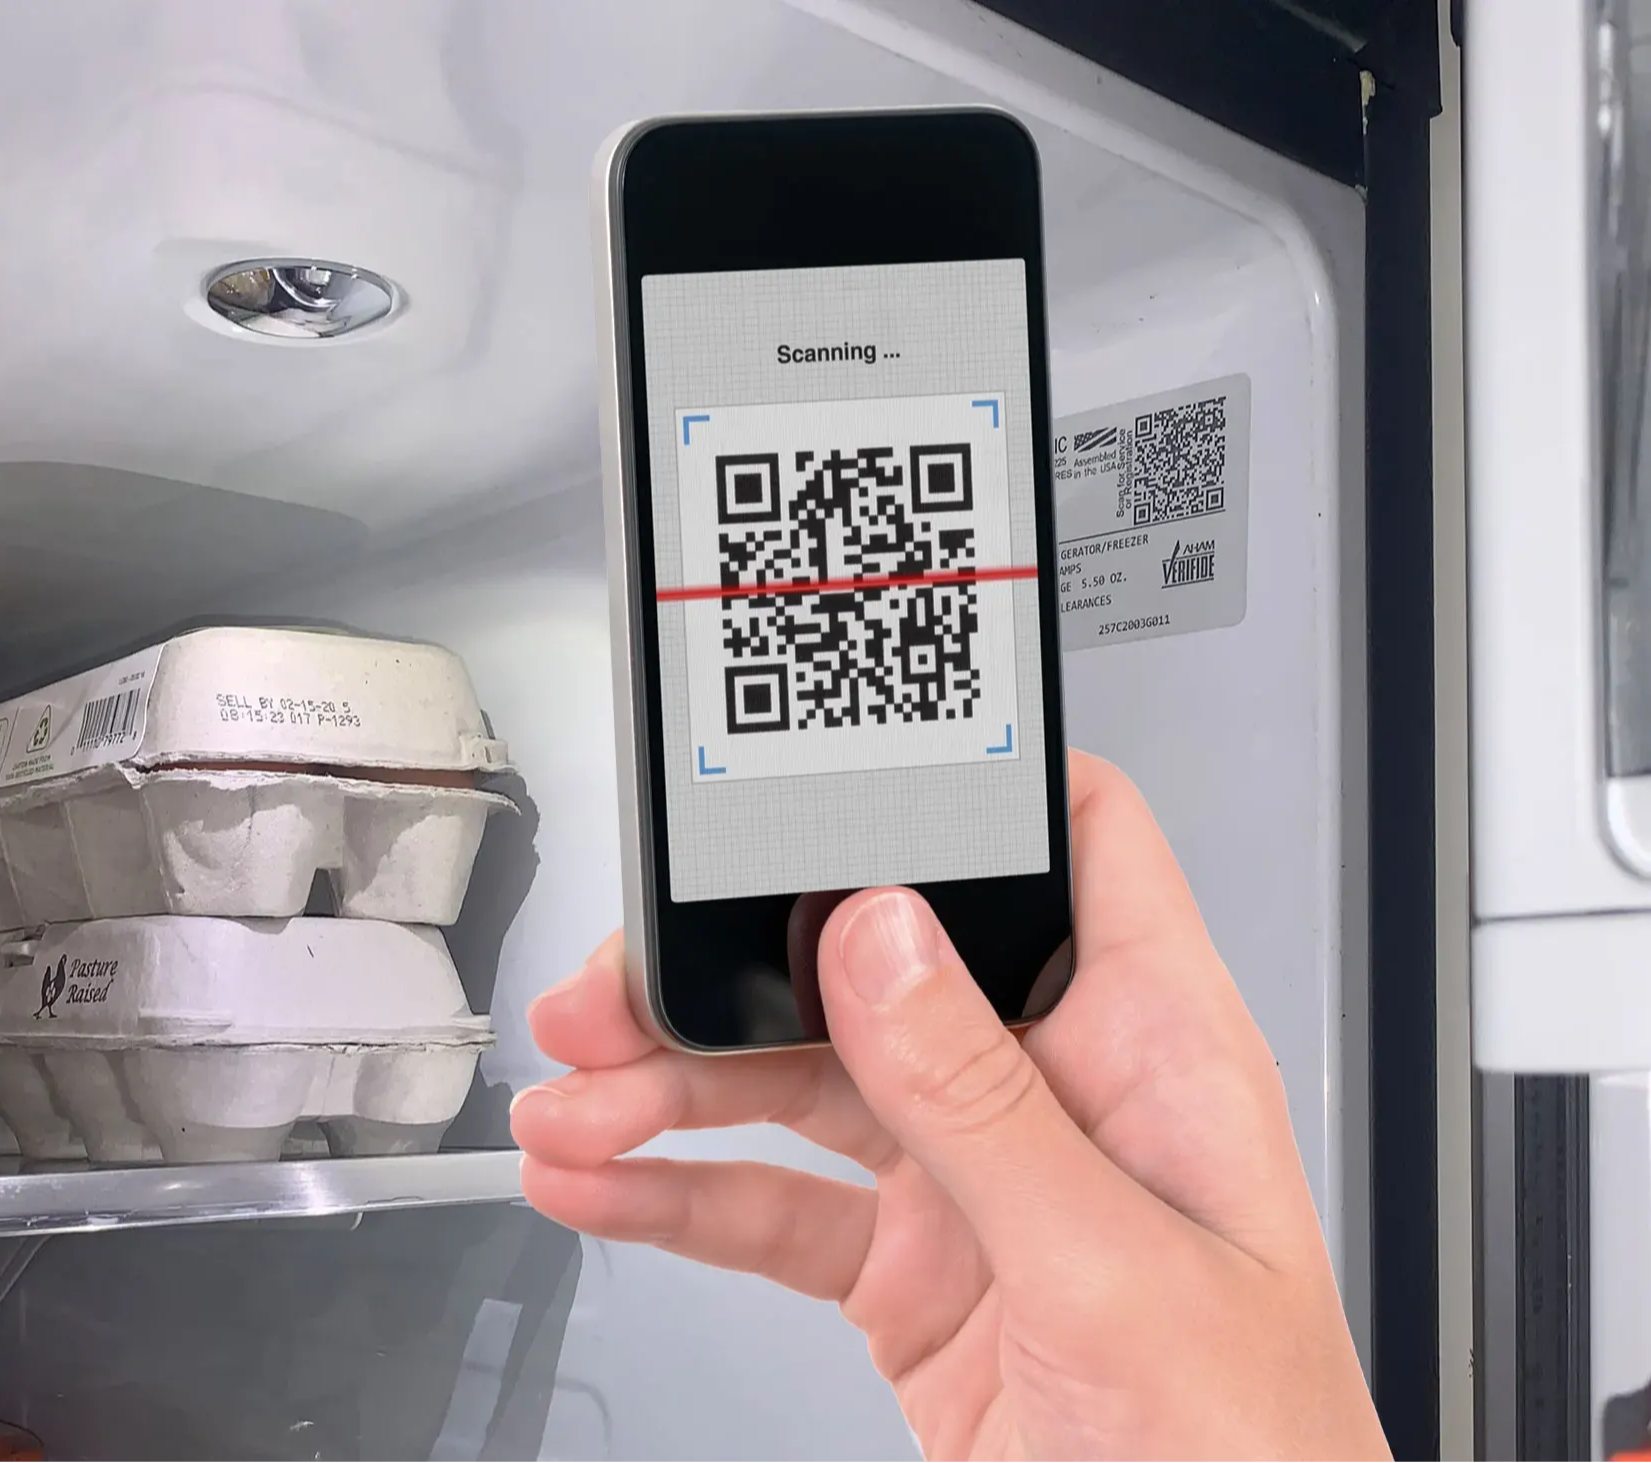 scanning a qr code in a refrigerator with a smartphone